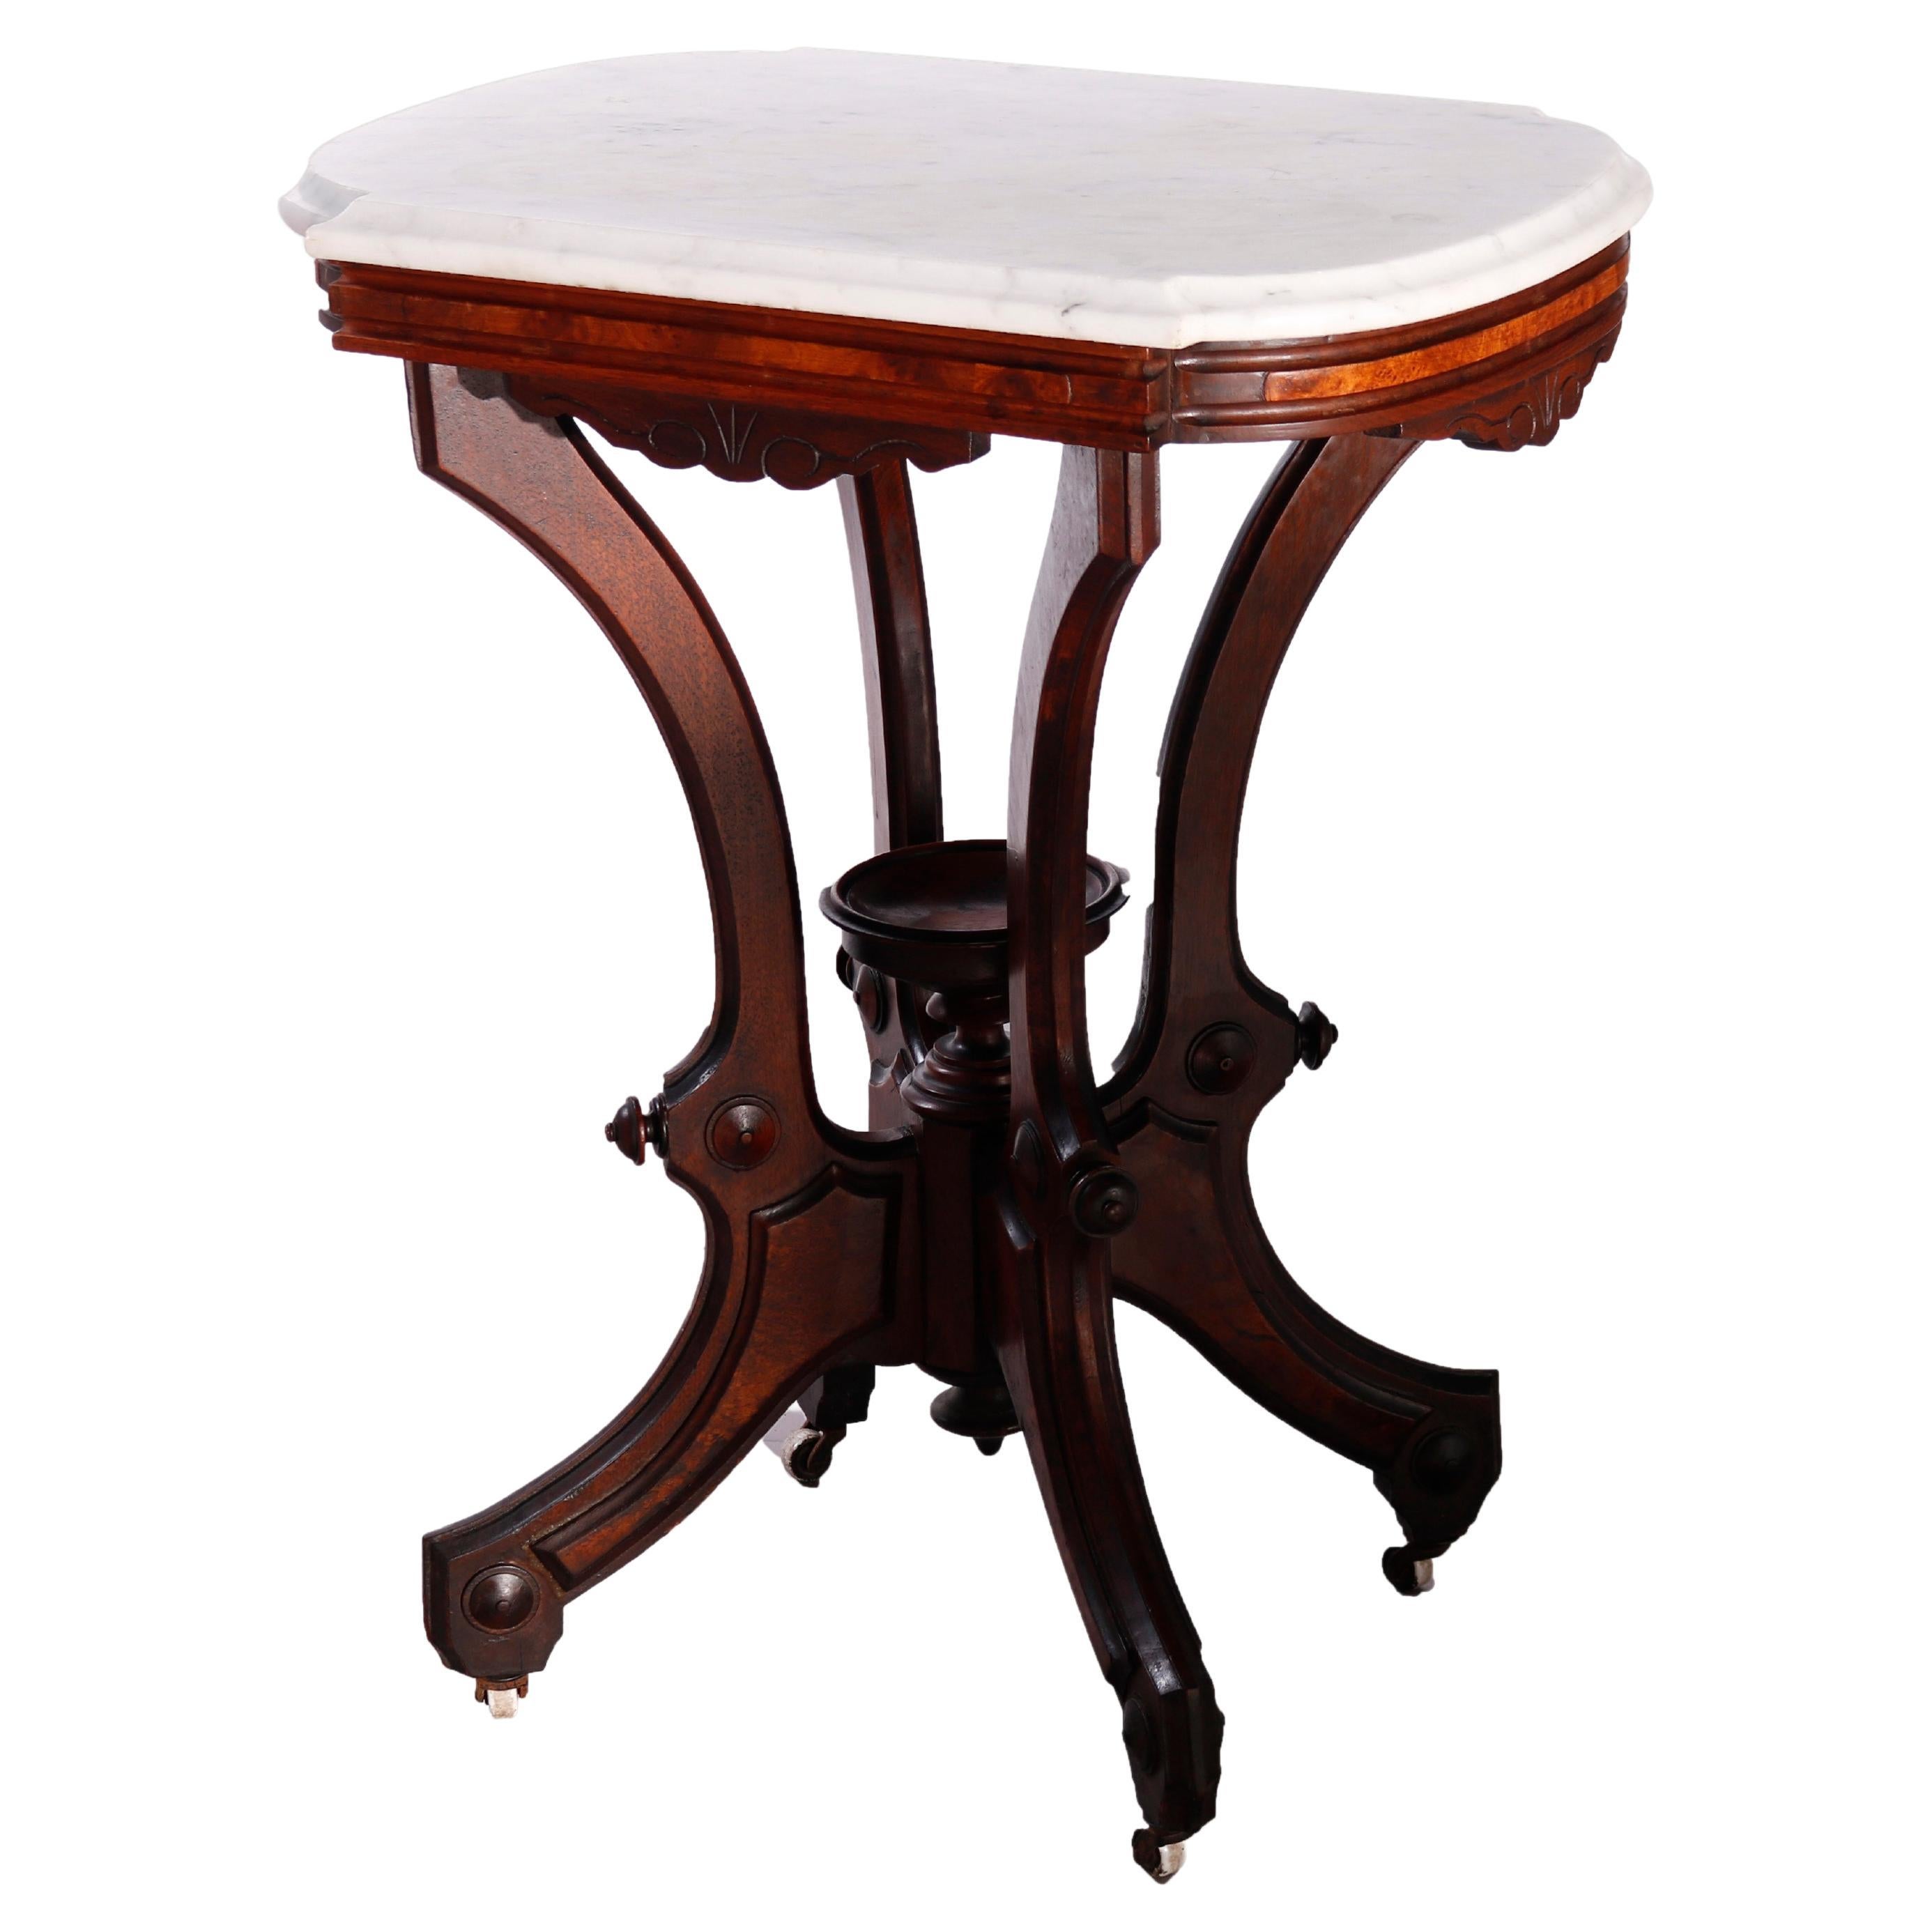 Antique Victorian Carved Walnut, Burl & Marble Parlor Table circa 1890